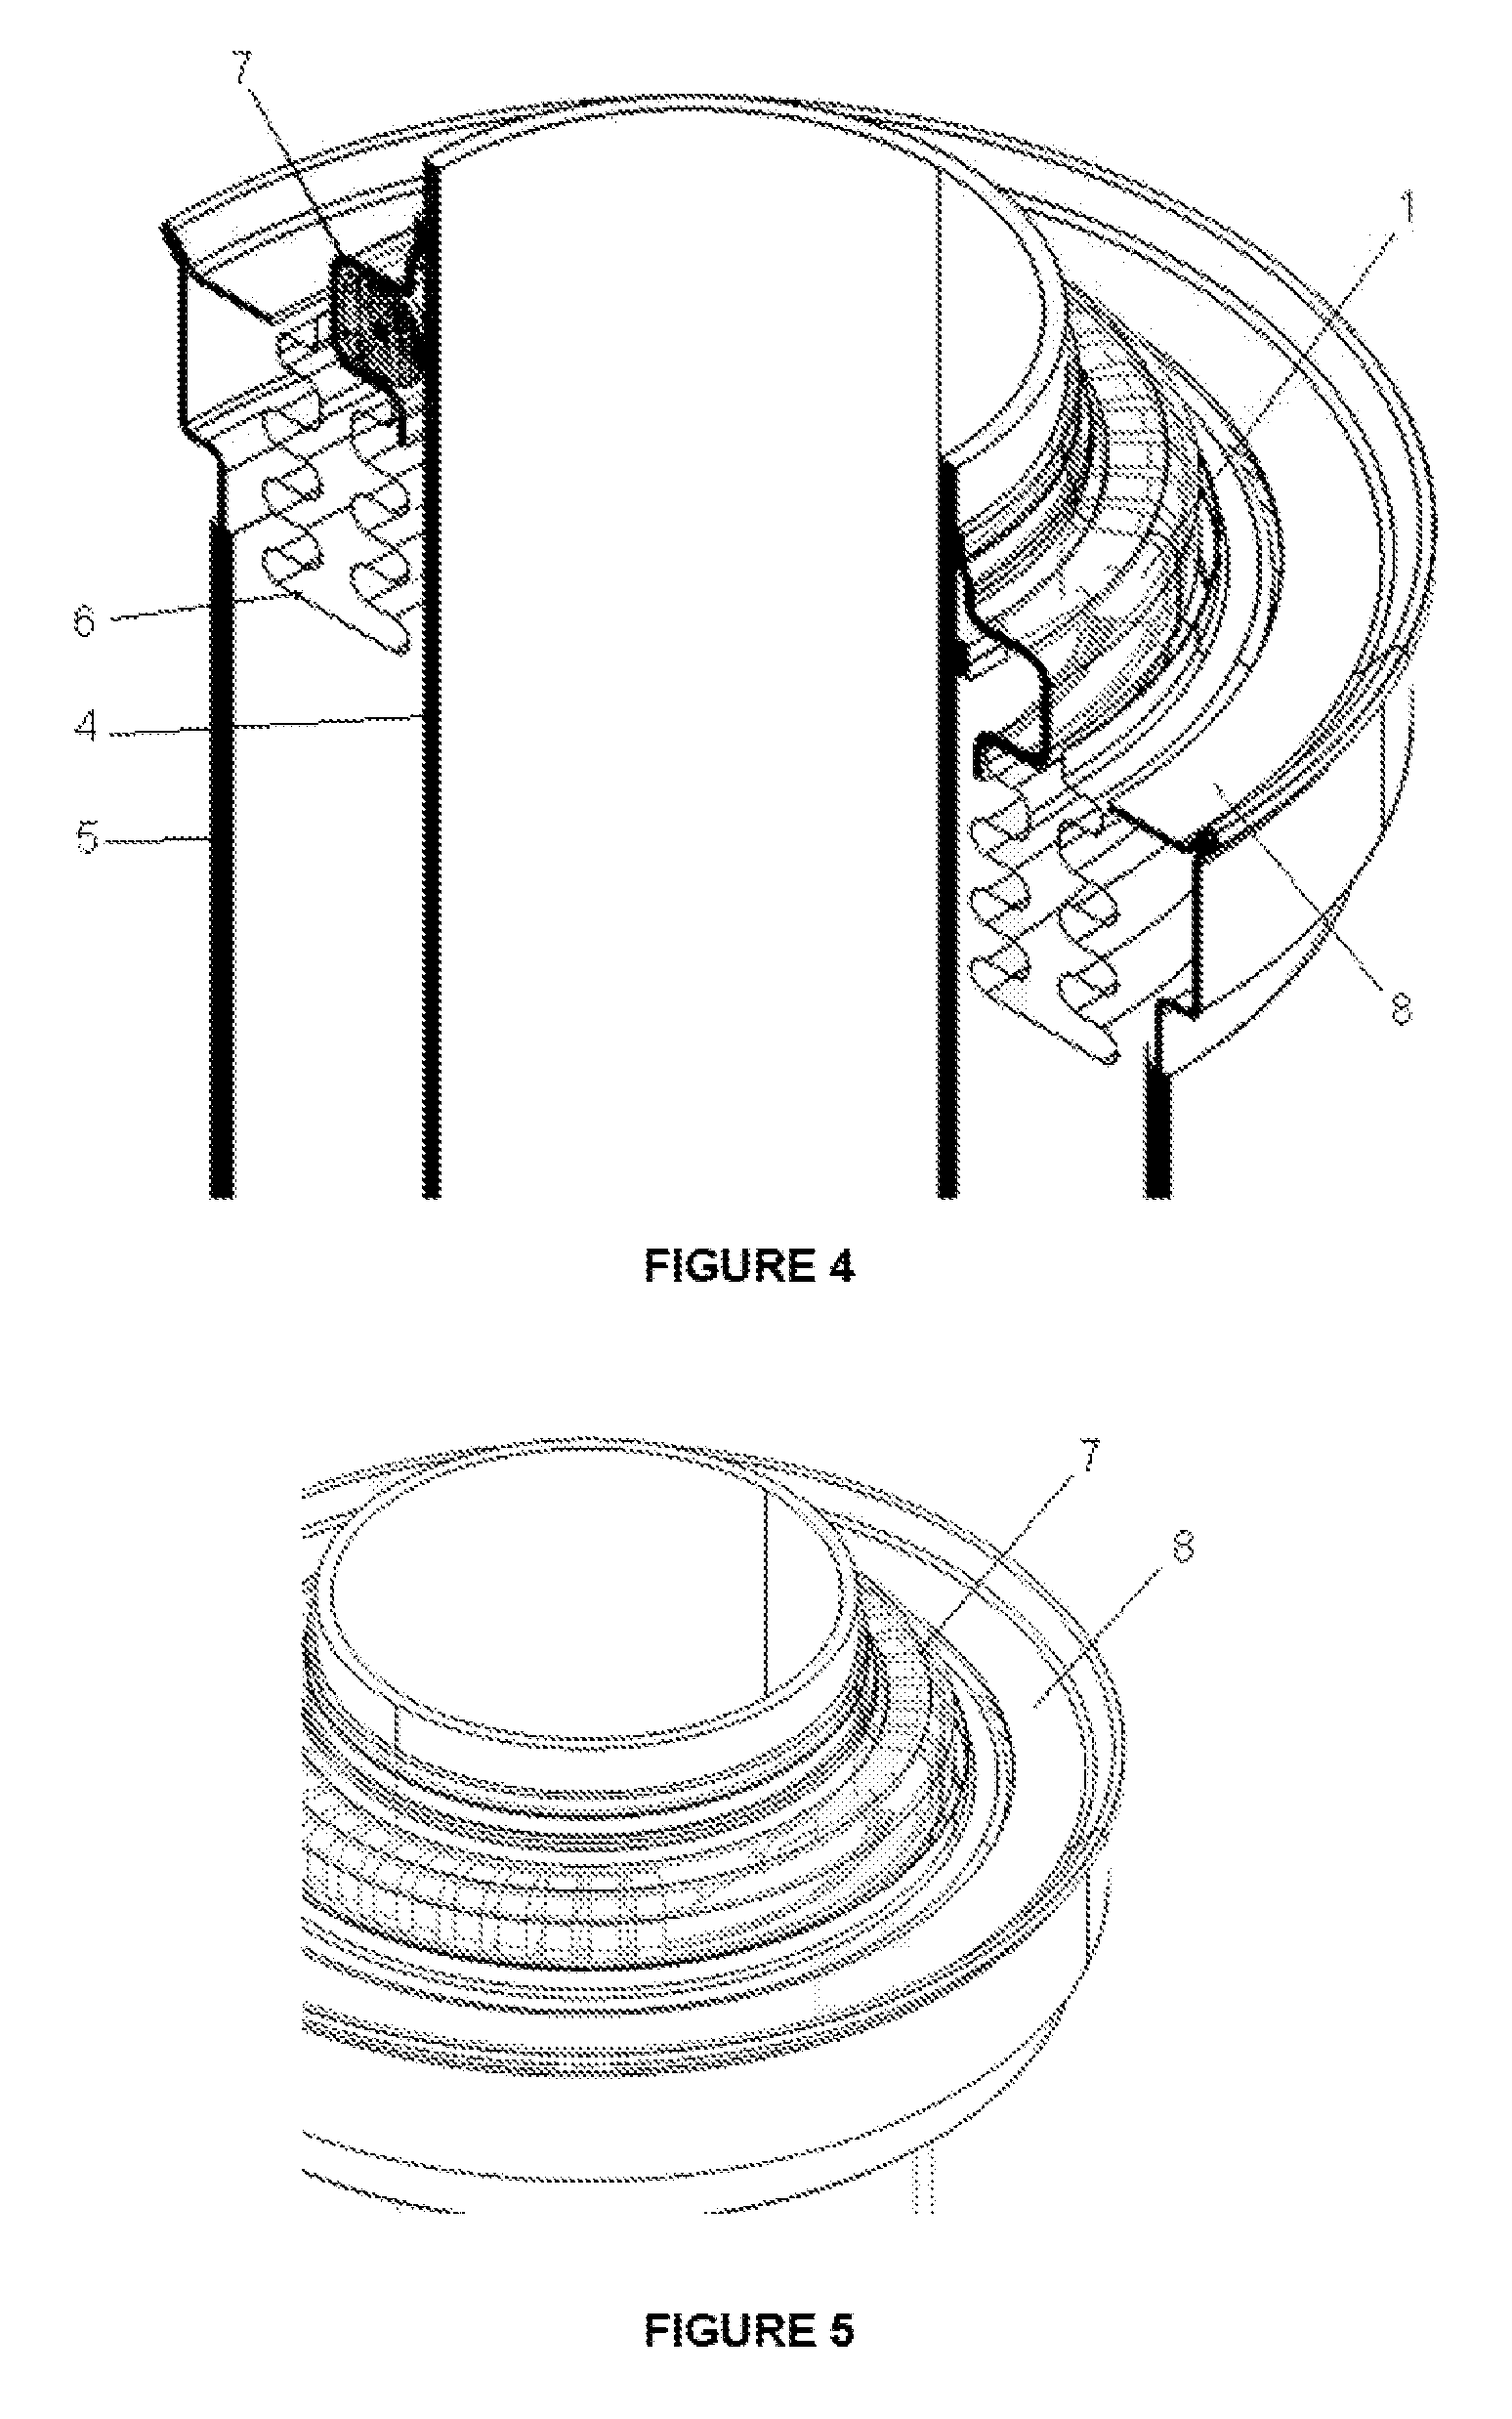 Vacuum enhancing system or non-evaporable getter